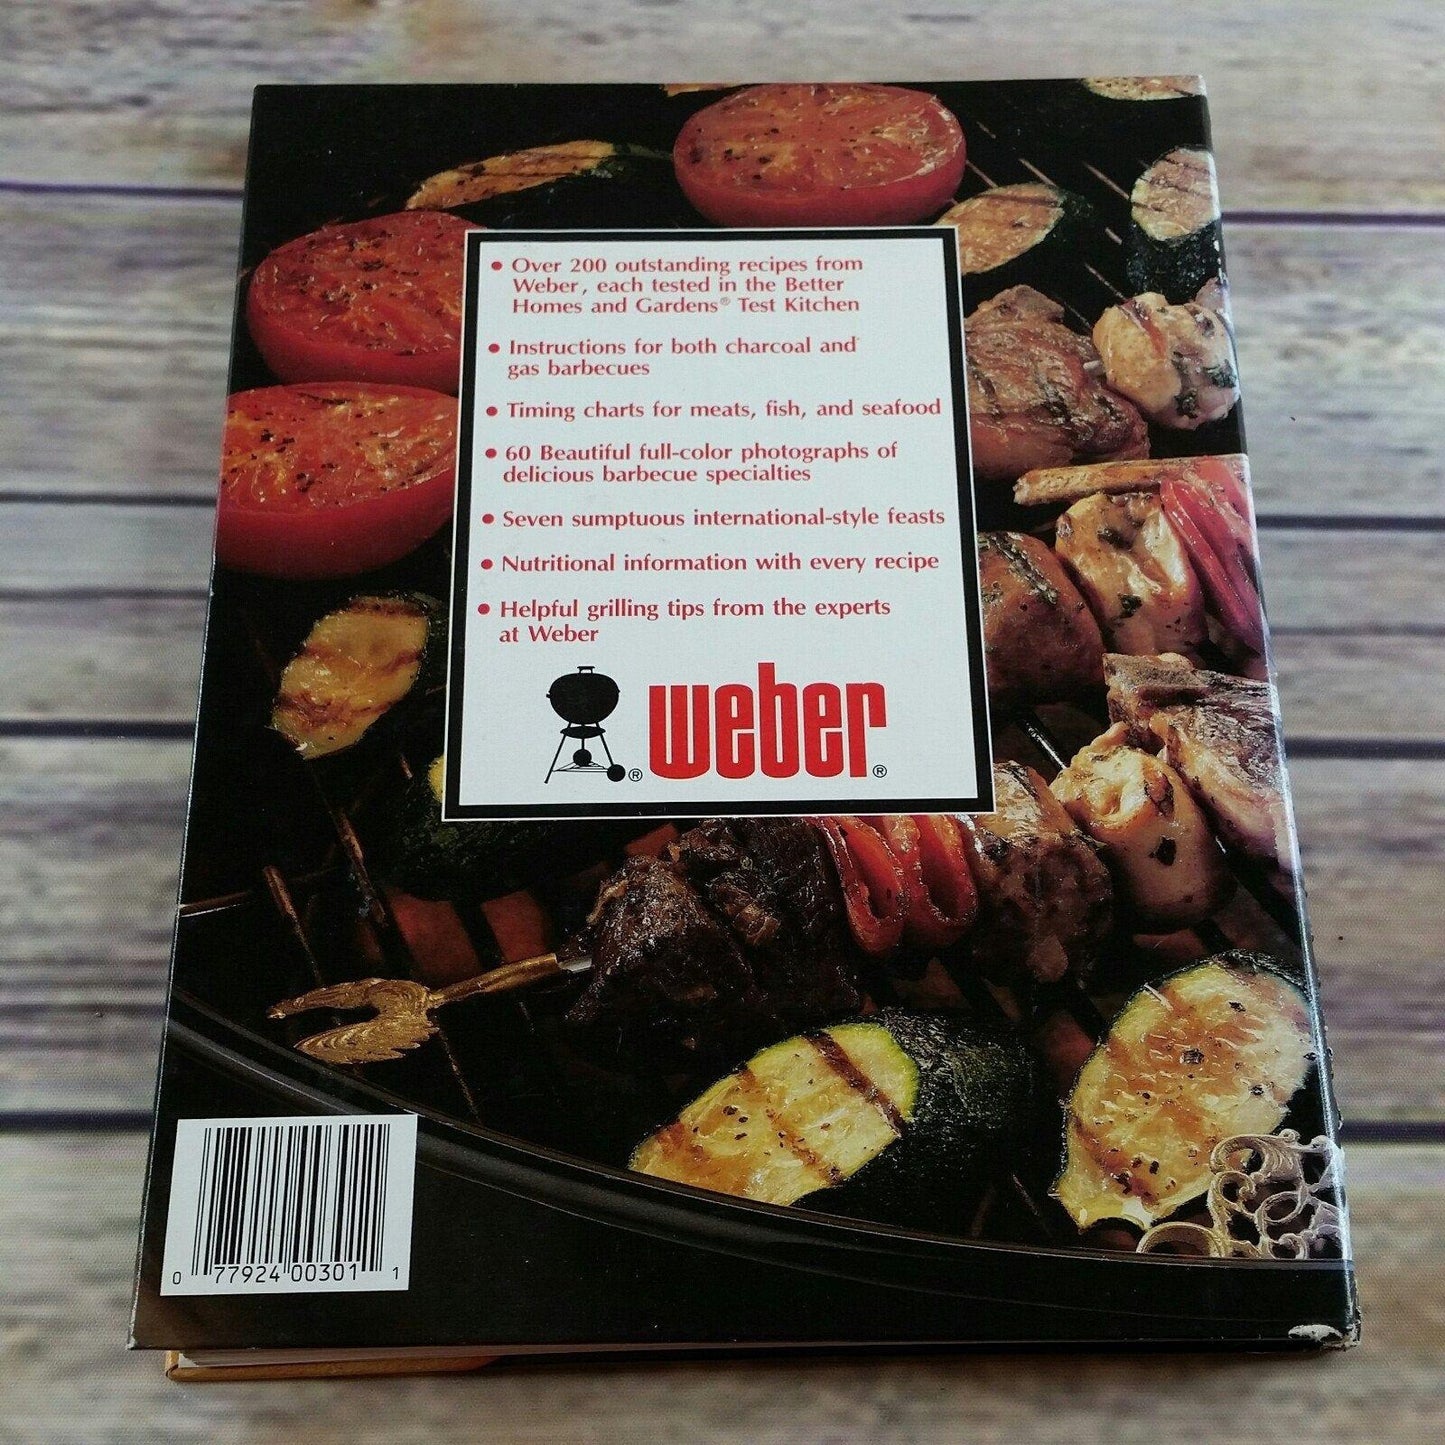 Vintage Cookbook Weber Grill Out Barbecue Recipes Charcoal Grill 1990 Hardcover Spiral Bound Beef Pork Lamb Poultry Fish Marinades